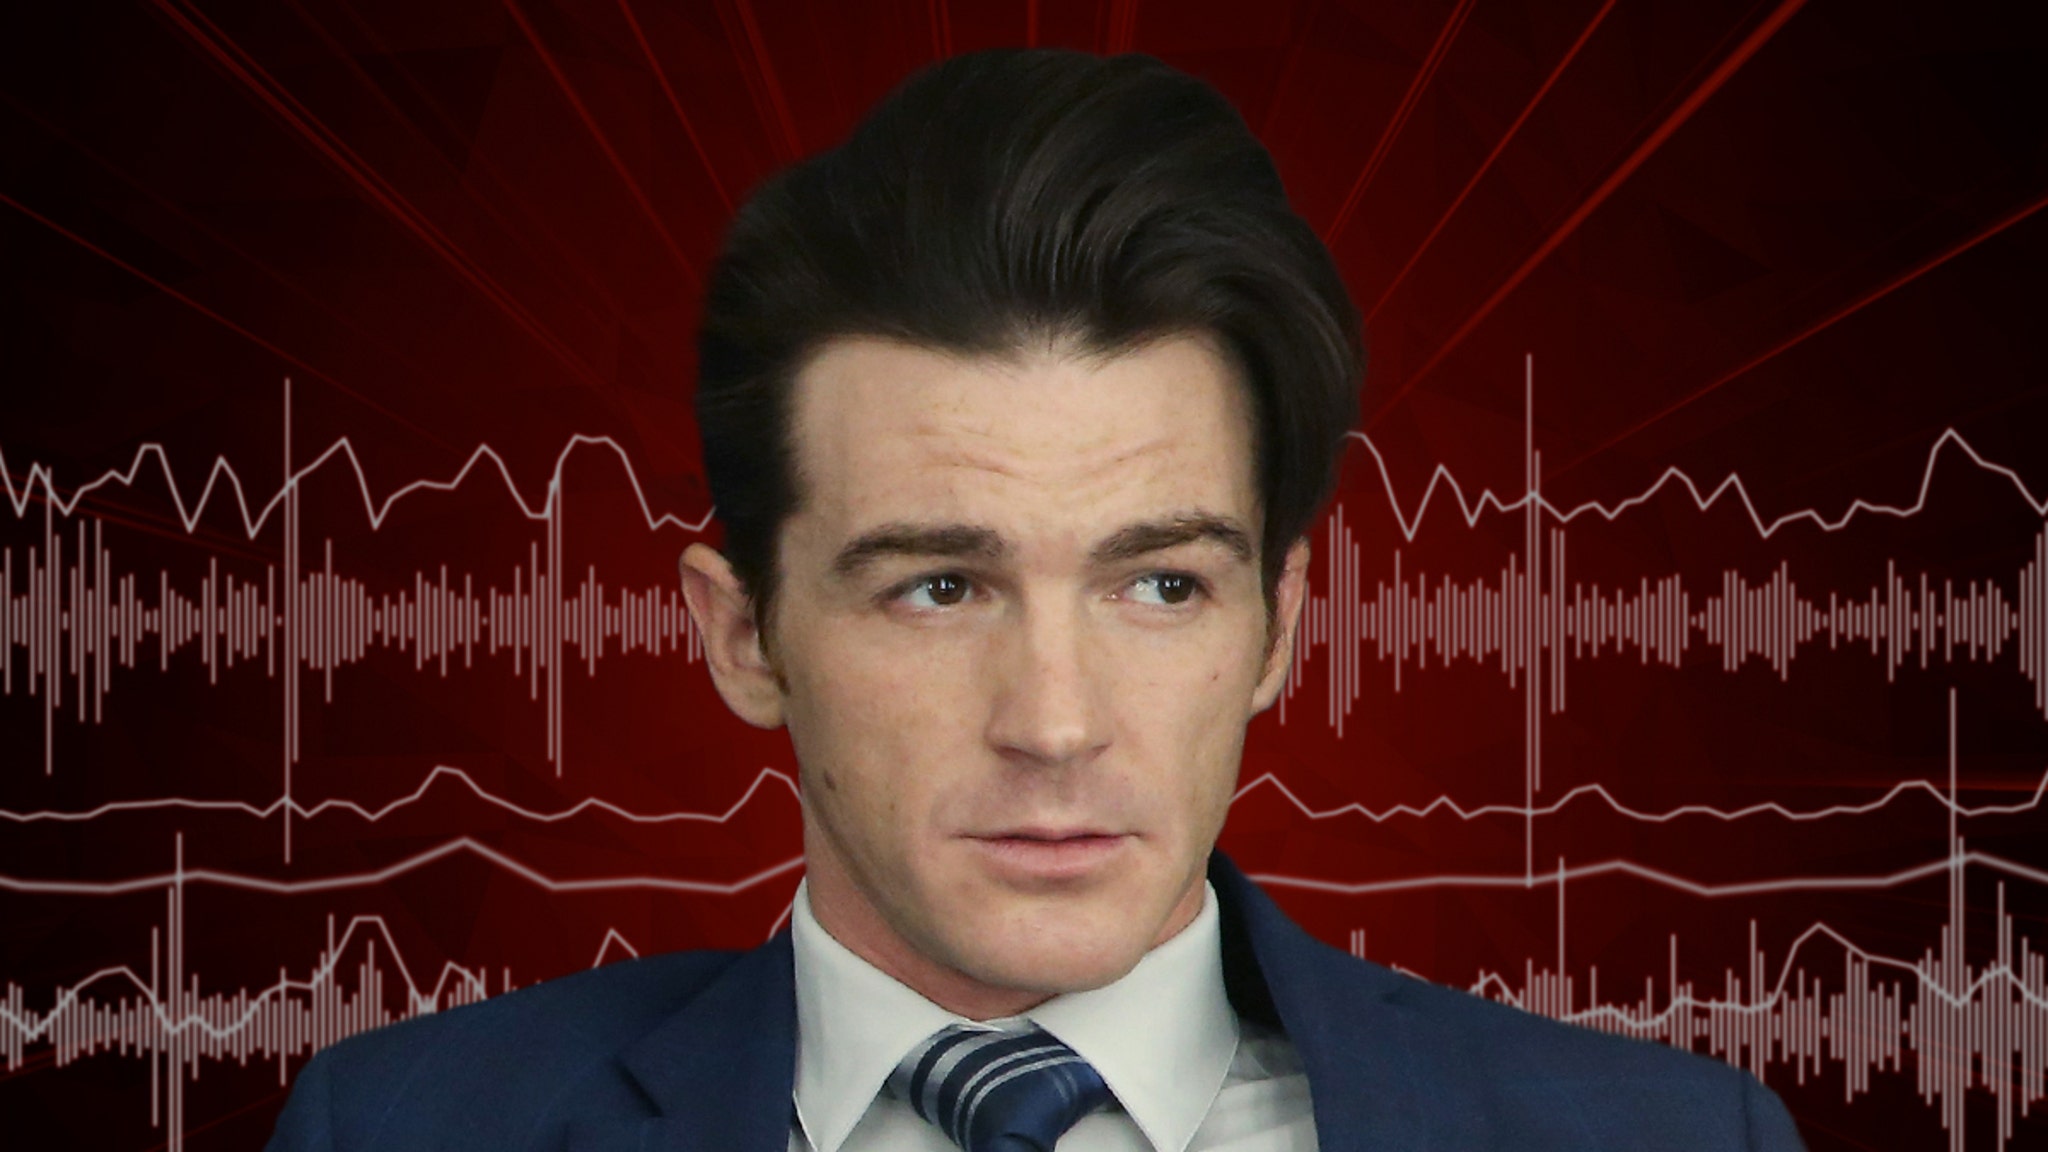 Drake Bell Threatened Suicide After Falling Out with Wife, According to 911 Call